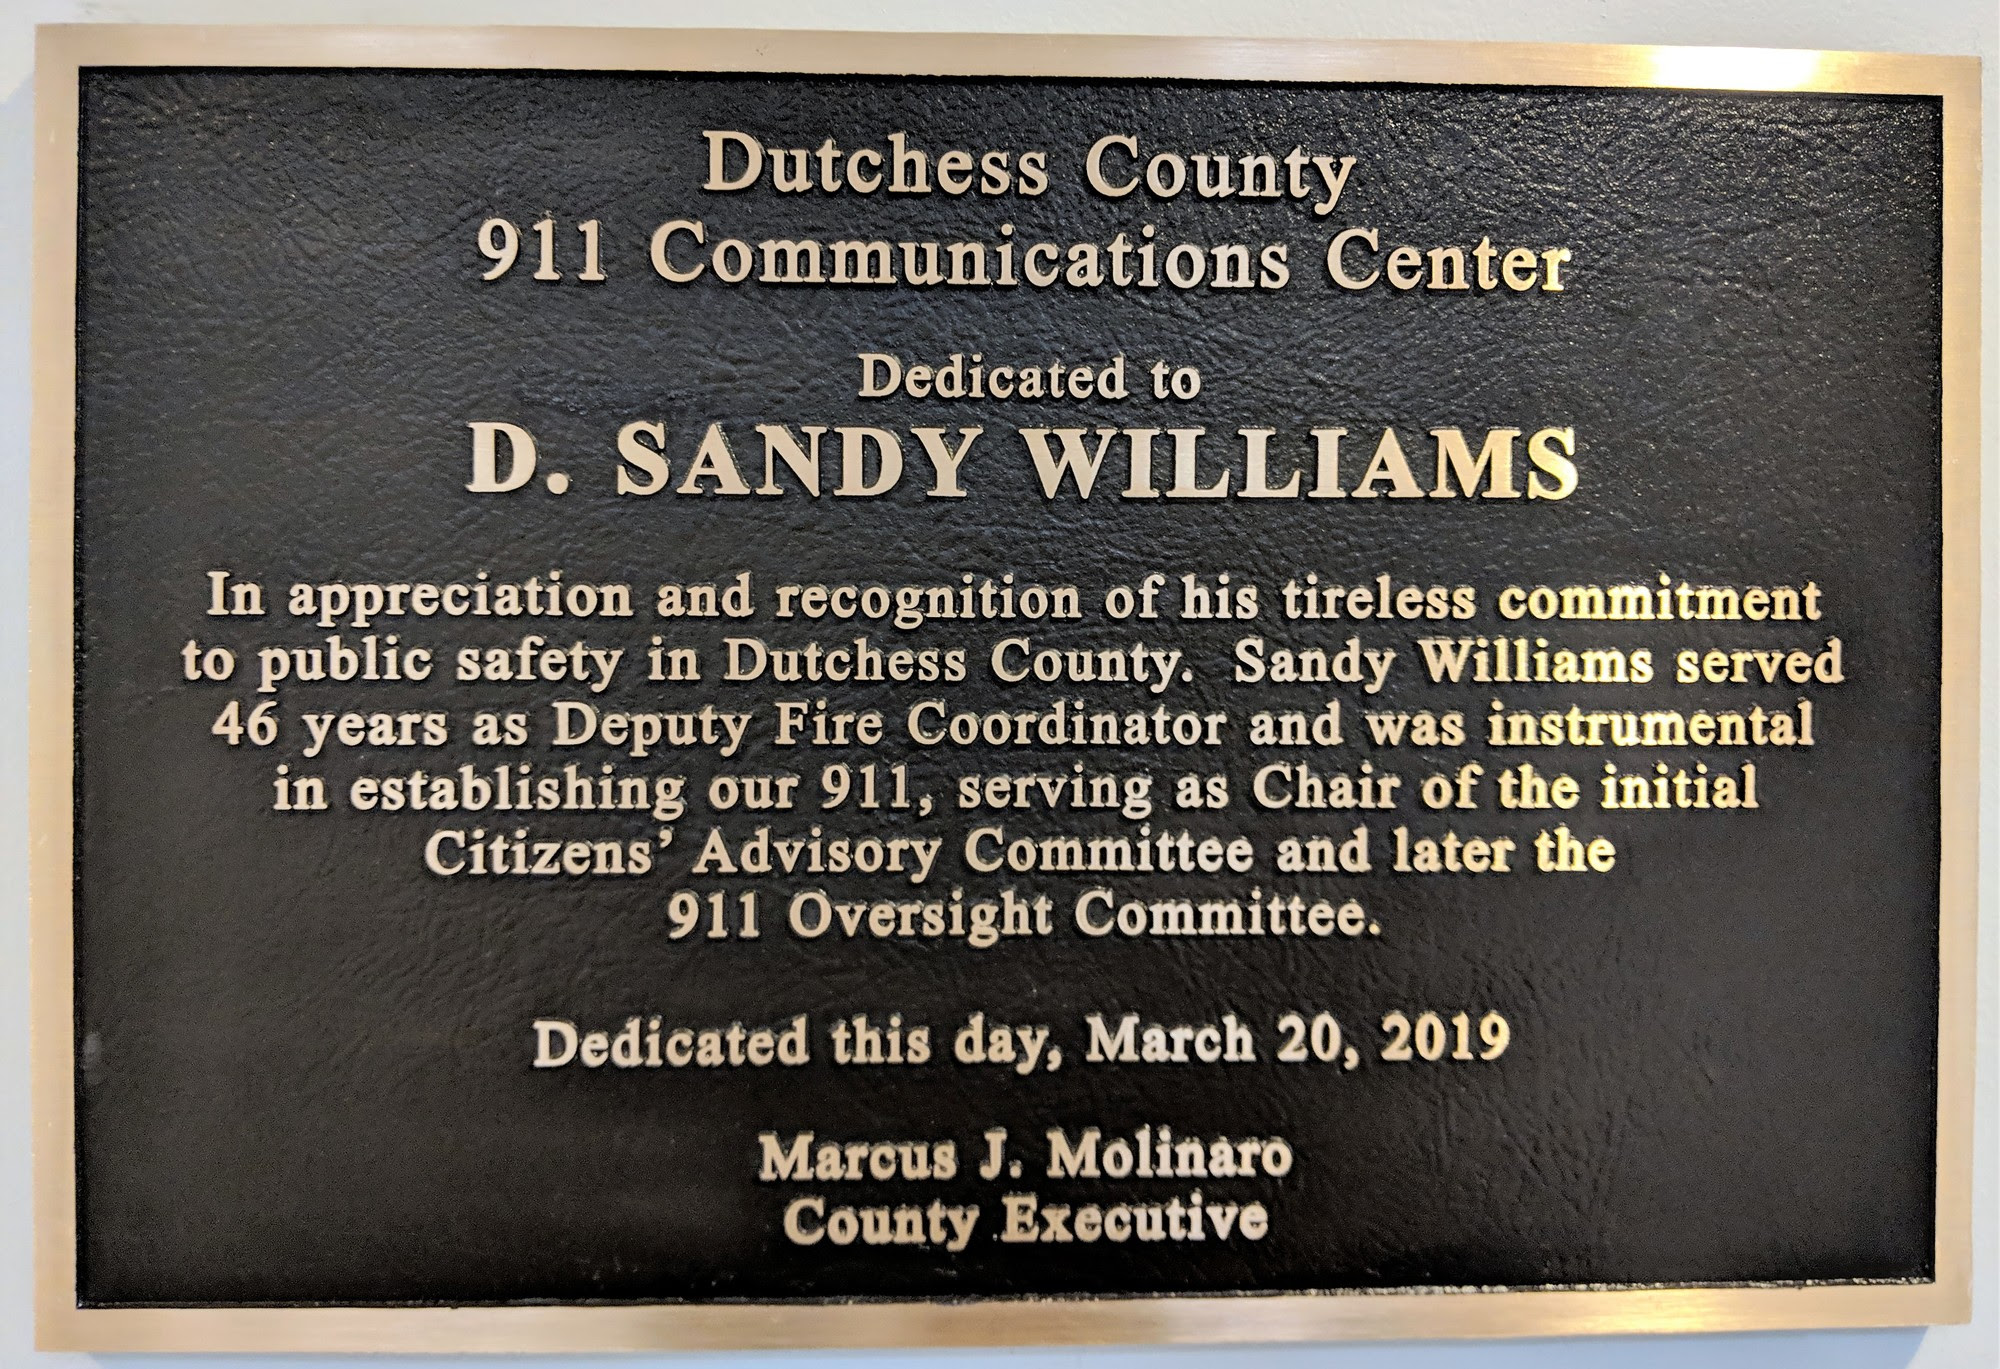 In recognition of Mr. Williams’ decades of service and his leadership, a plaque now adorns the Dutchess County 9-1-1 Communications Center.